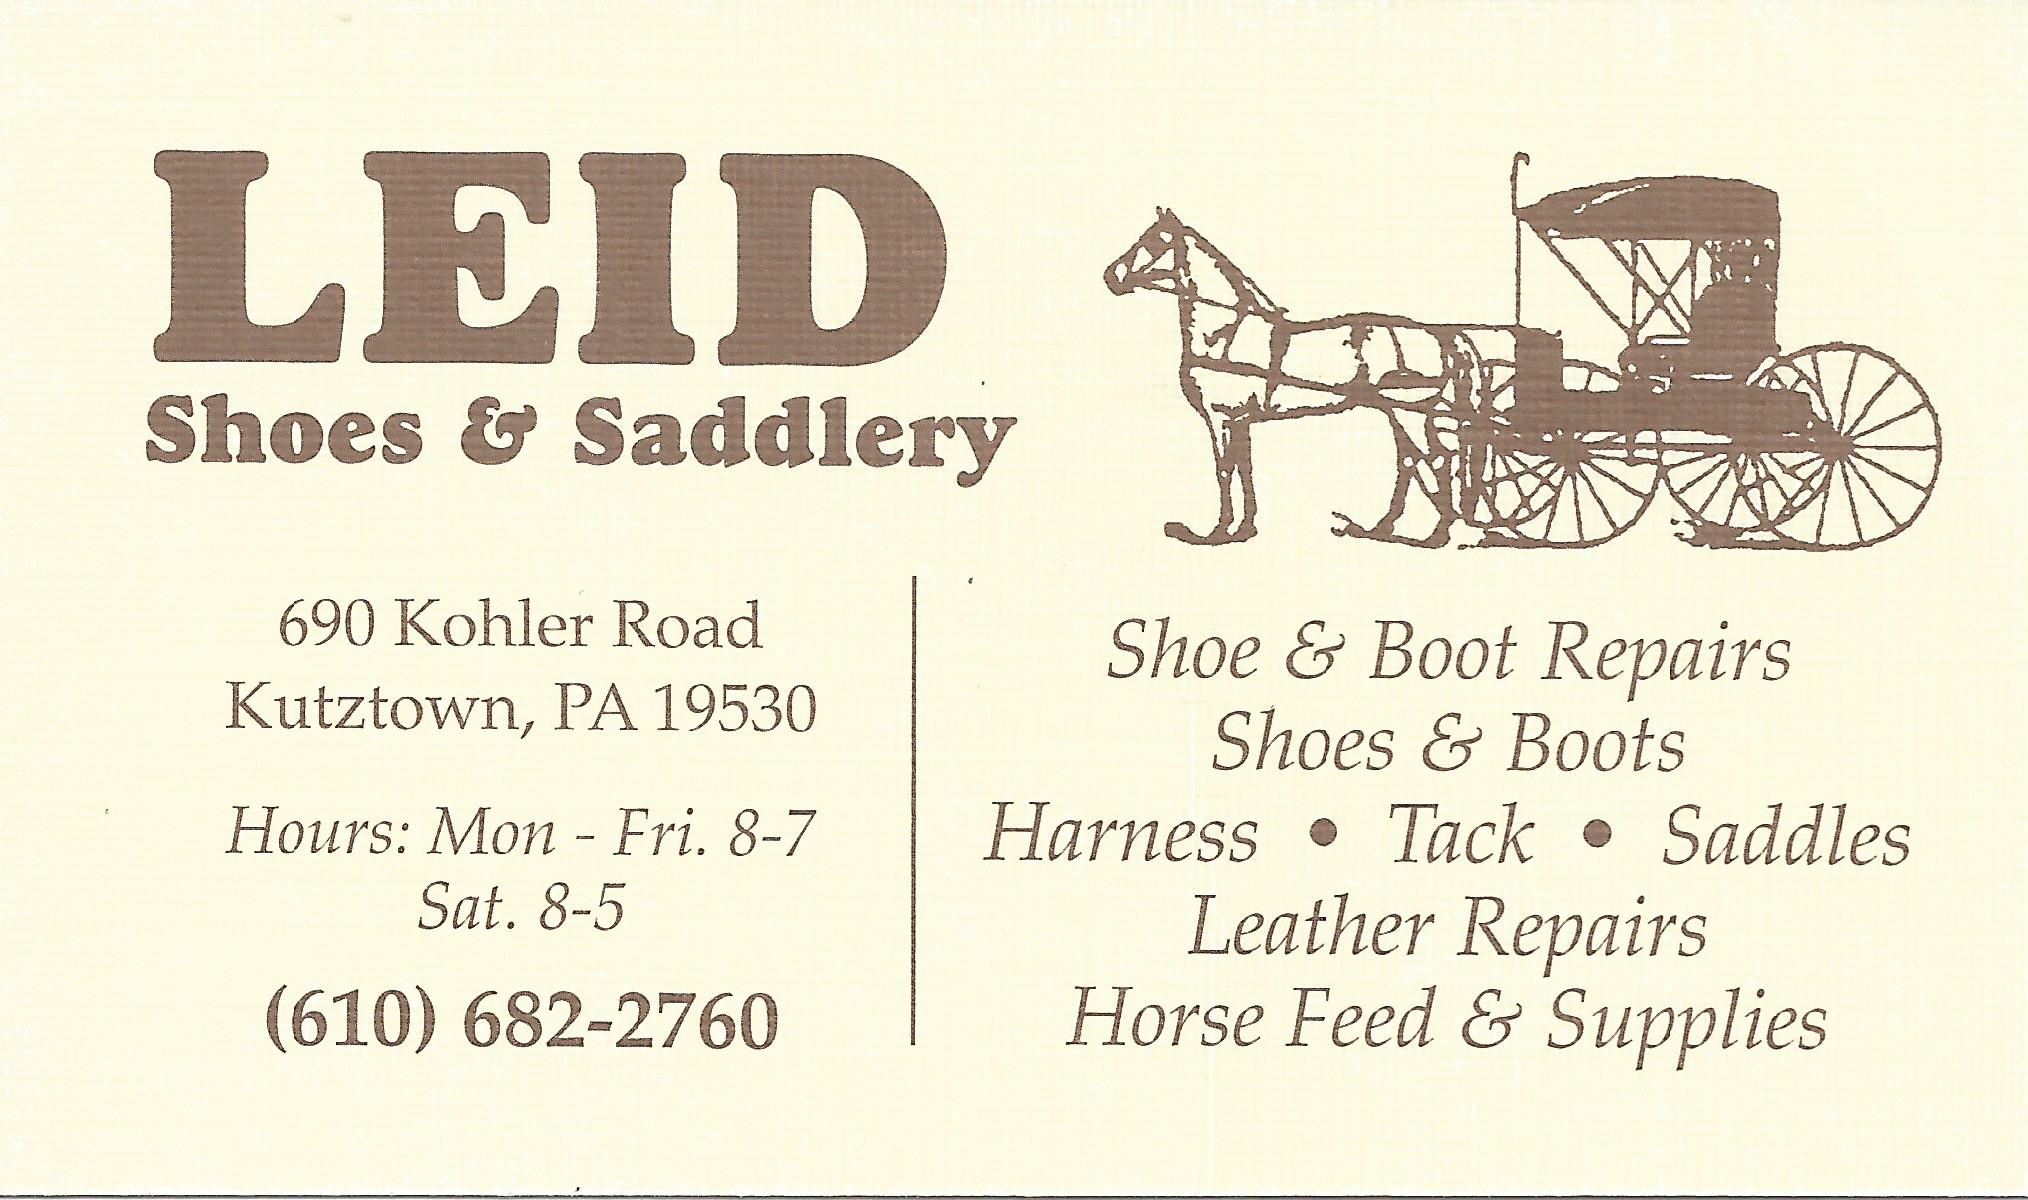 Leid Shoes and Saddlery